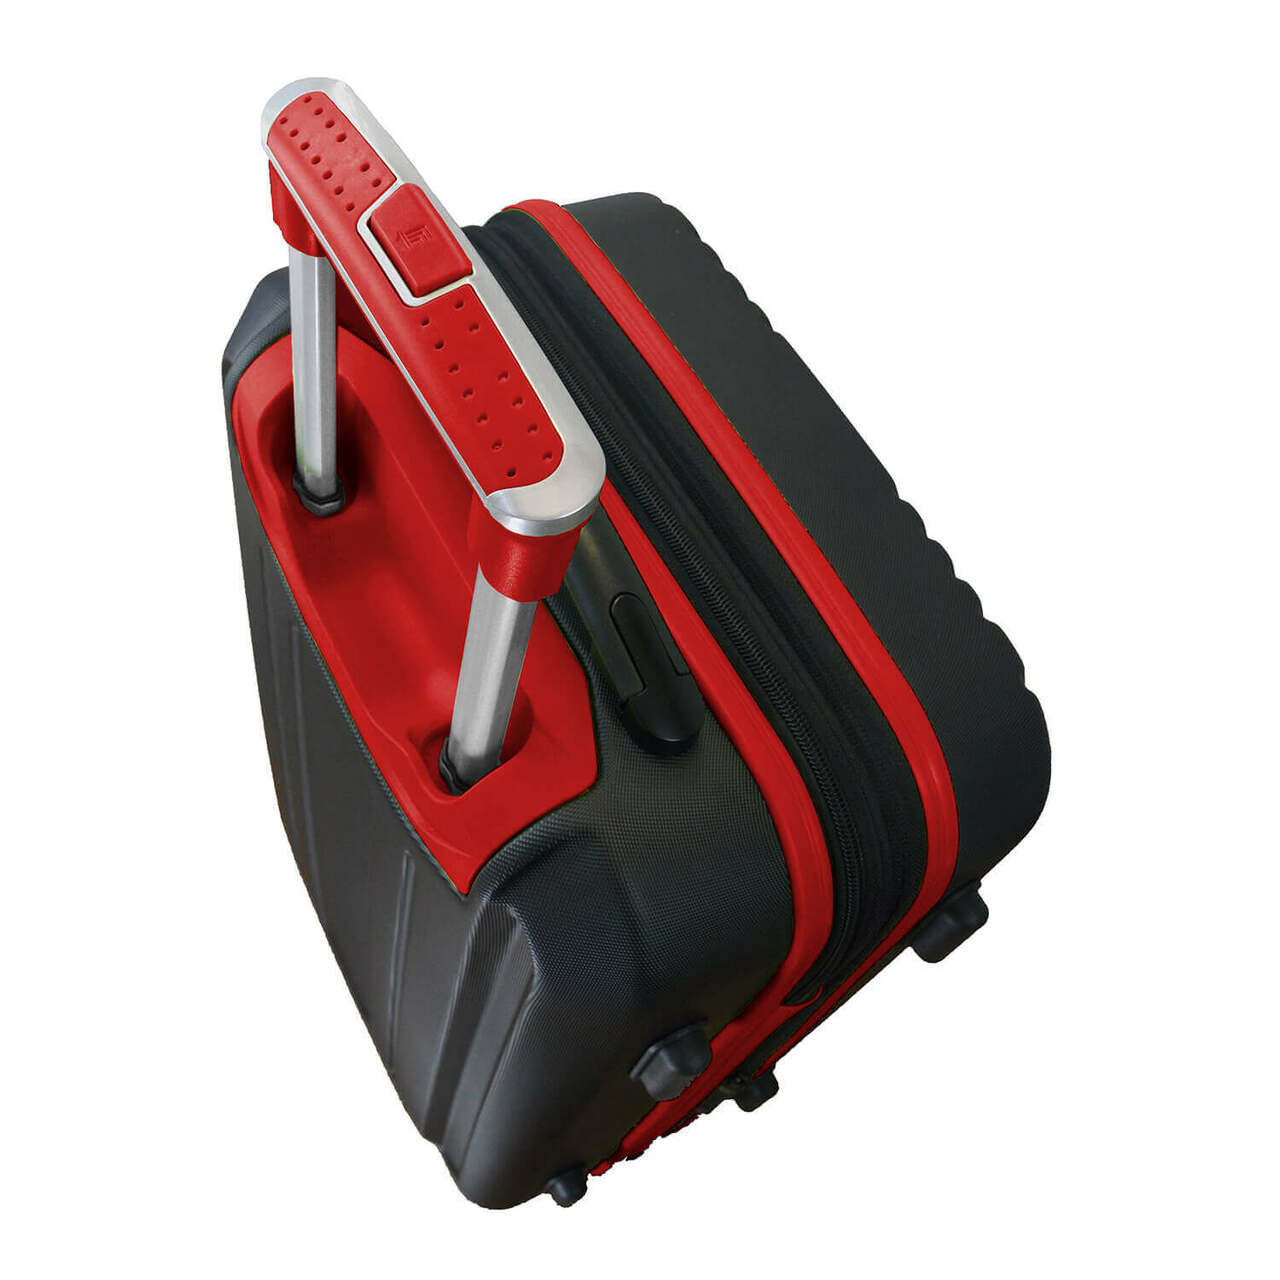 Cardinals Carry On Spinner Luggage | St Louis Cardinals Hardcase Two-Tone Luggage Carry-on Spinner in Red